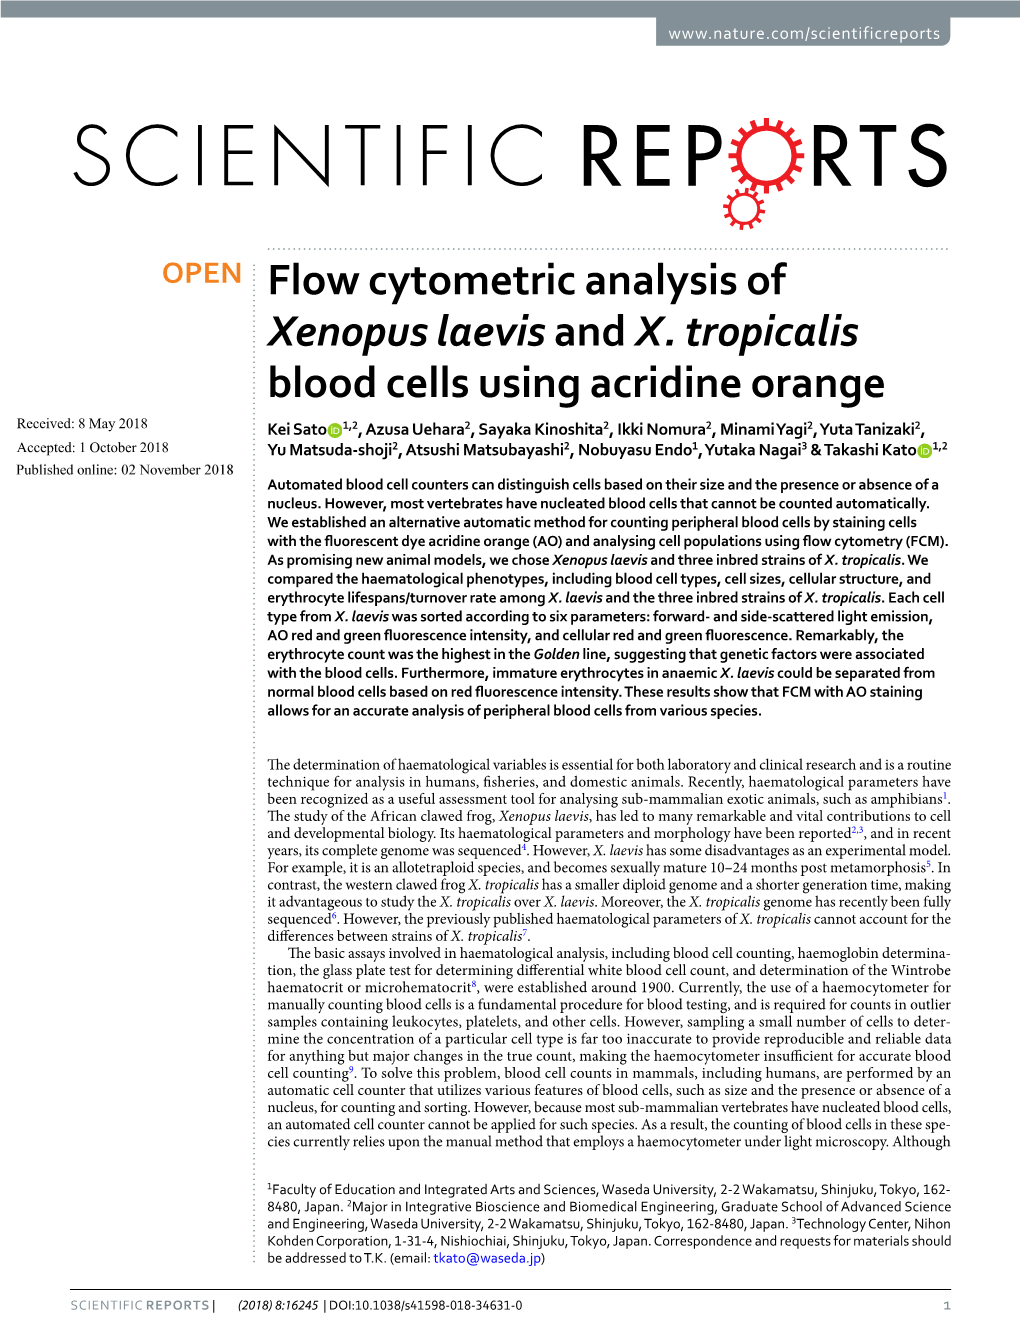 Flow Cytometric Analysis of Xenopus Laevis and X. Tropicalis Blood Cells Using Acridine Orange